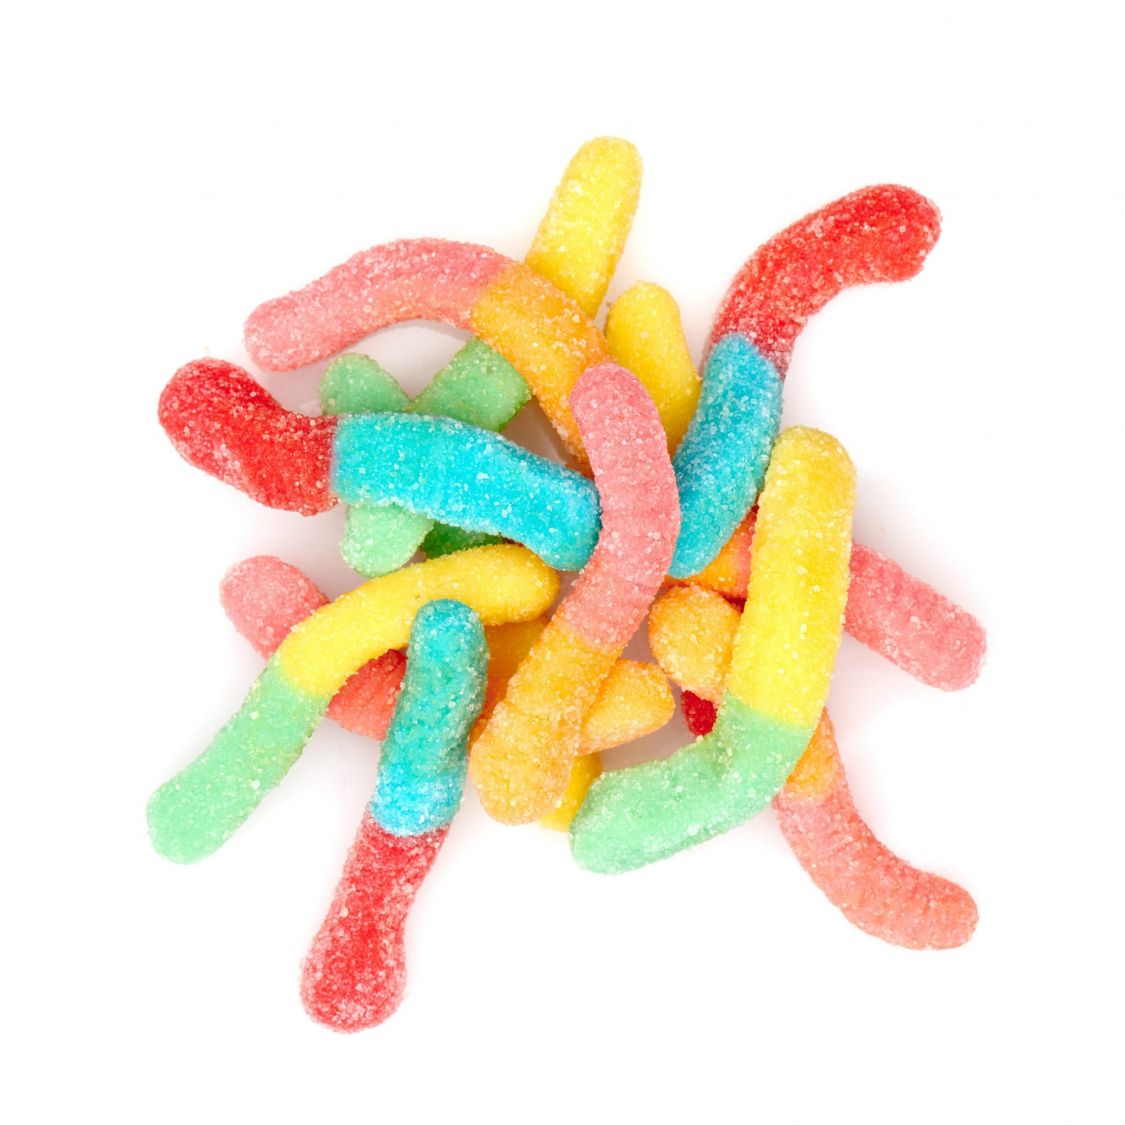 Truth Rx 300mg Gummy Worms Edibles Edible